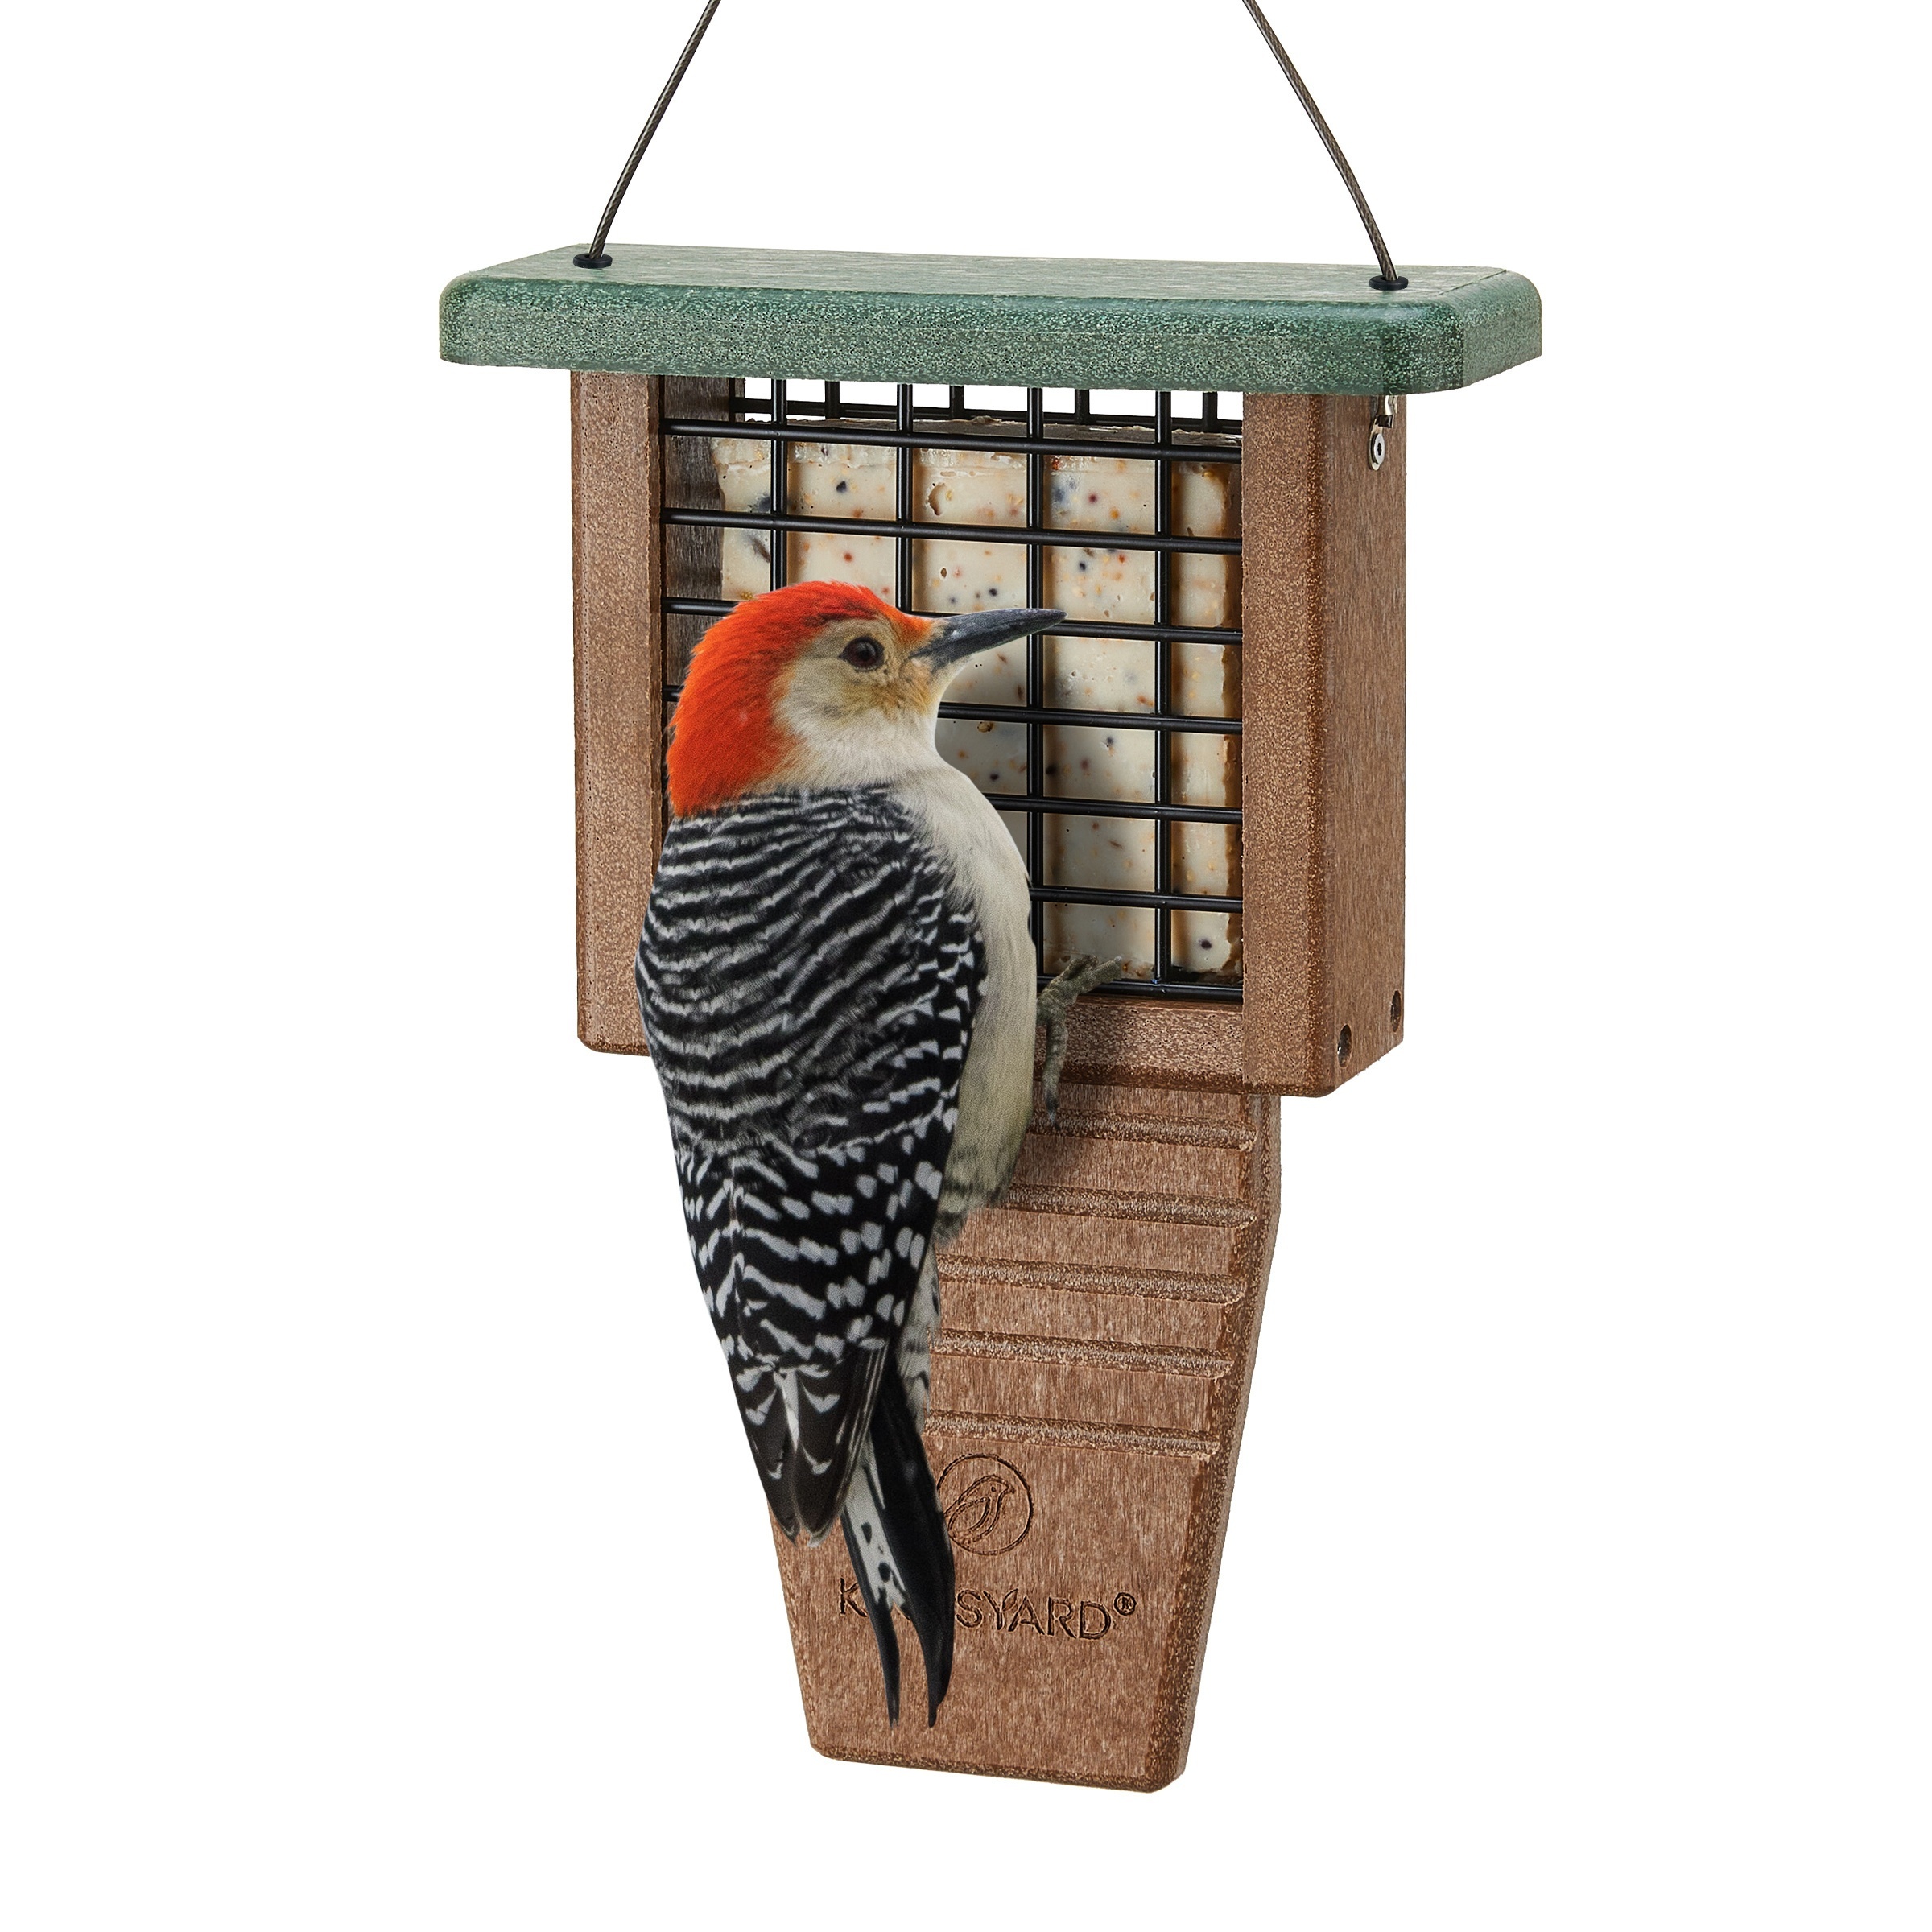 

Kingsyard Recycled Plastic Bird Feeder, Tail Prop Feeder For Outside Hanging, Sturdy & Durable, Great For Woodpecker & Clinging Birds, Green